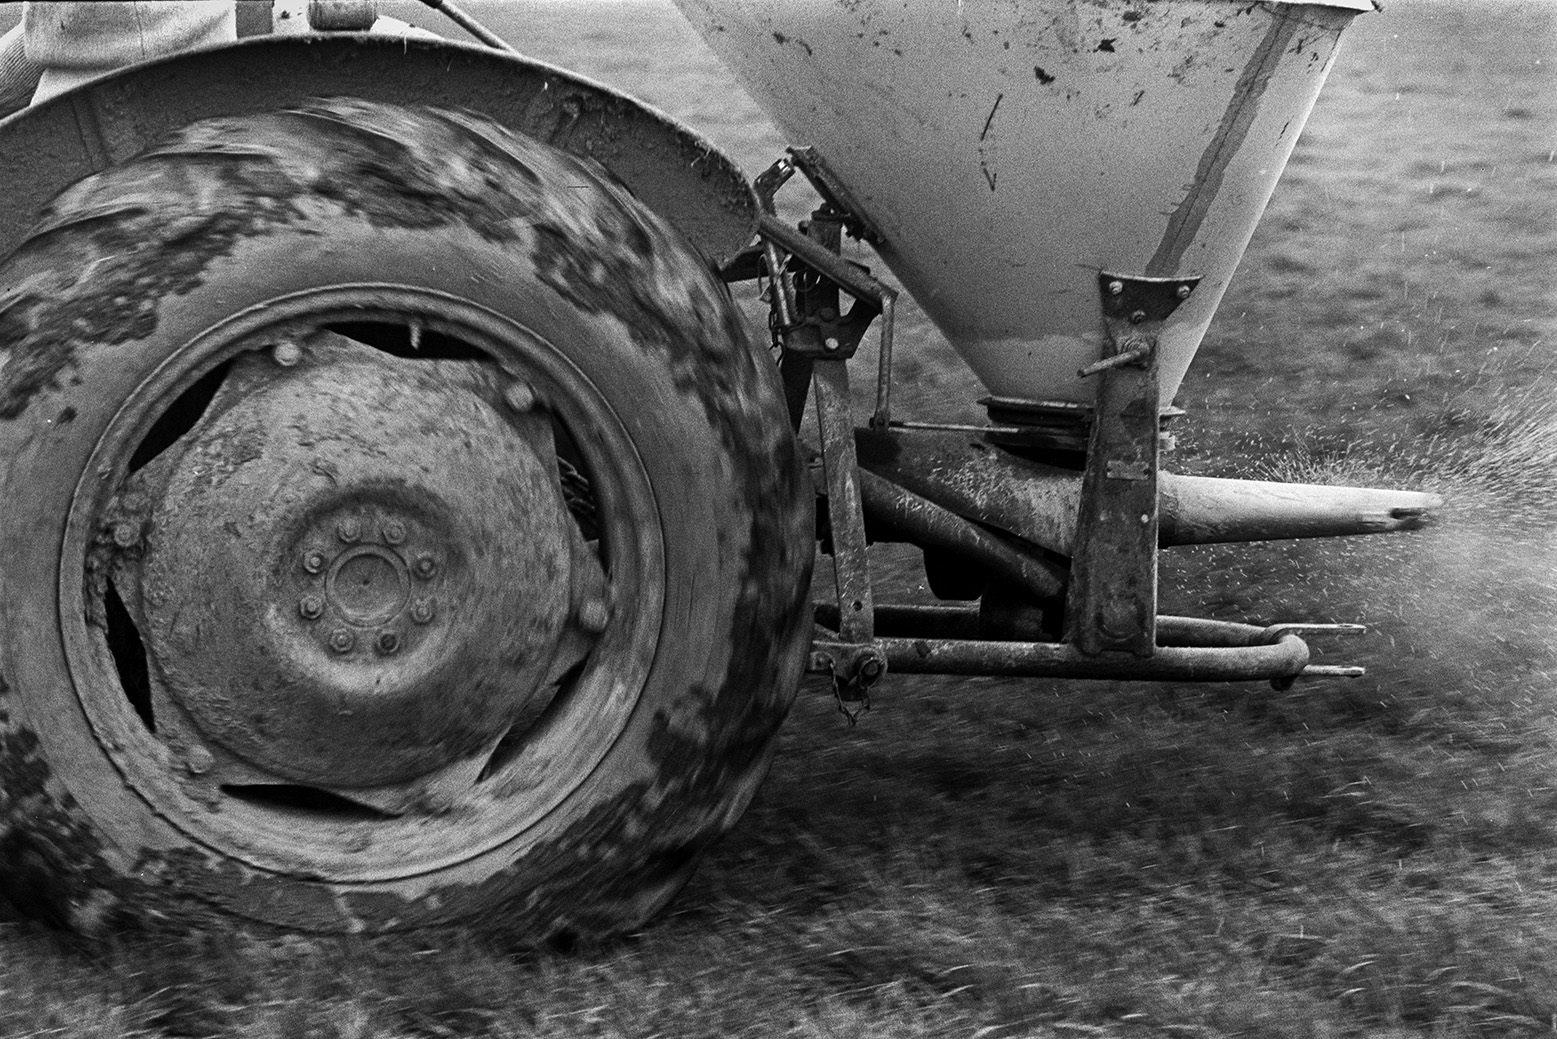 A tractor and fertilizer spreader distributing fertilizer over a field at Mill Road Farm, Beaford. The farm was also known as Jeffrys.